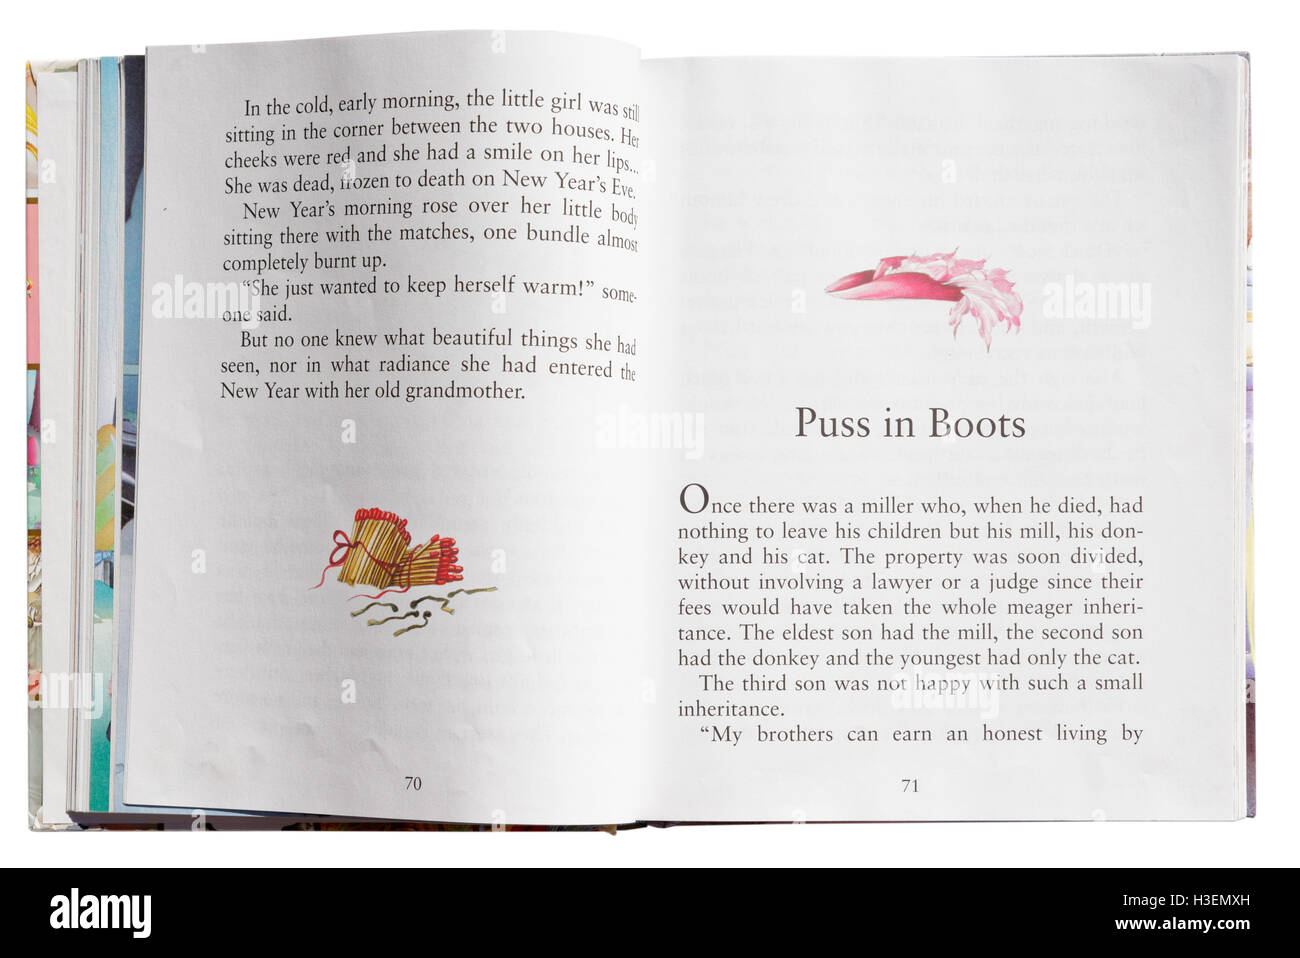 Puss in Boots in a book of Fairy Tales Stock Photo